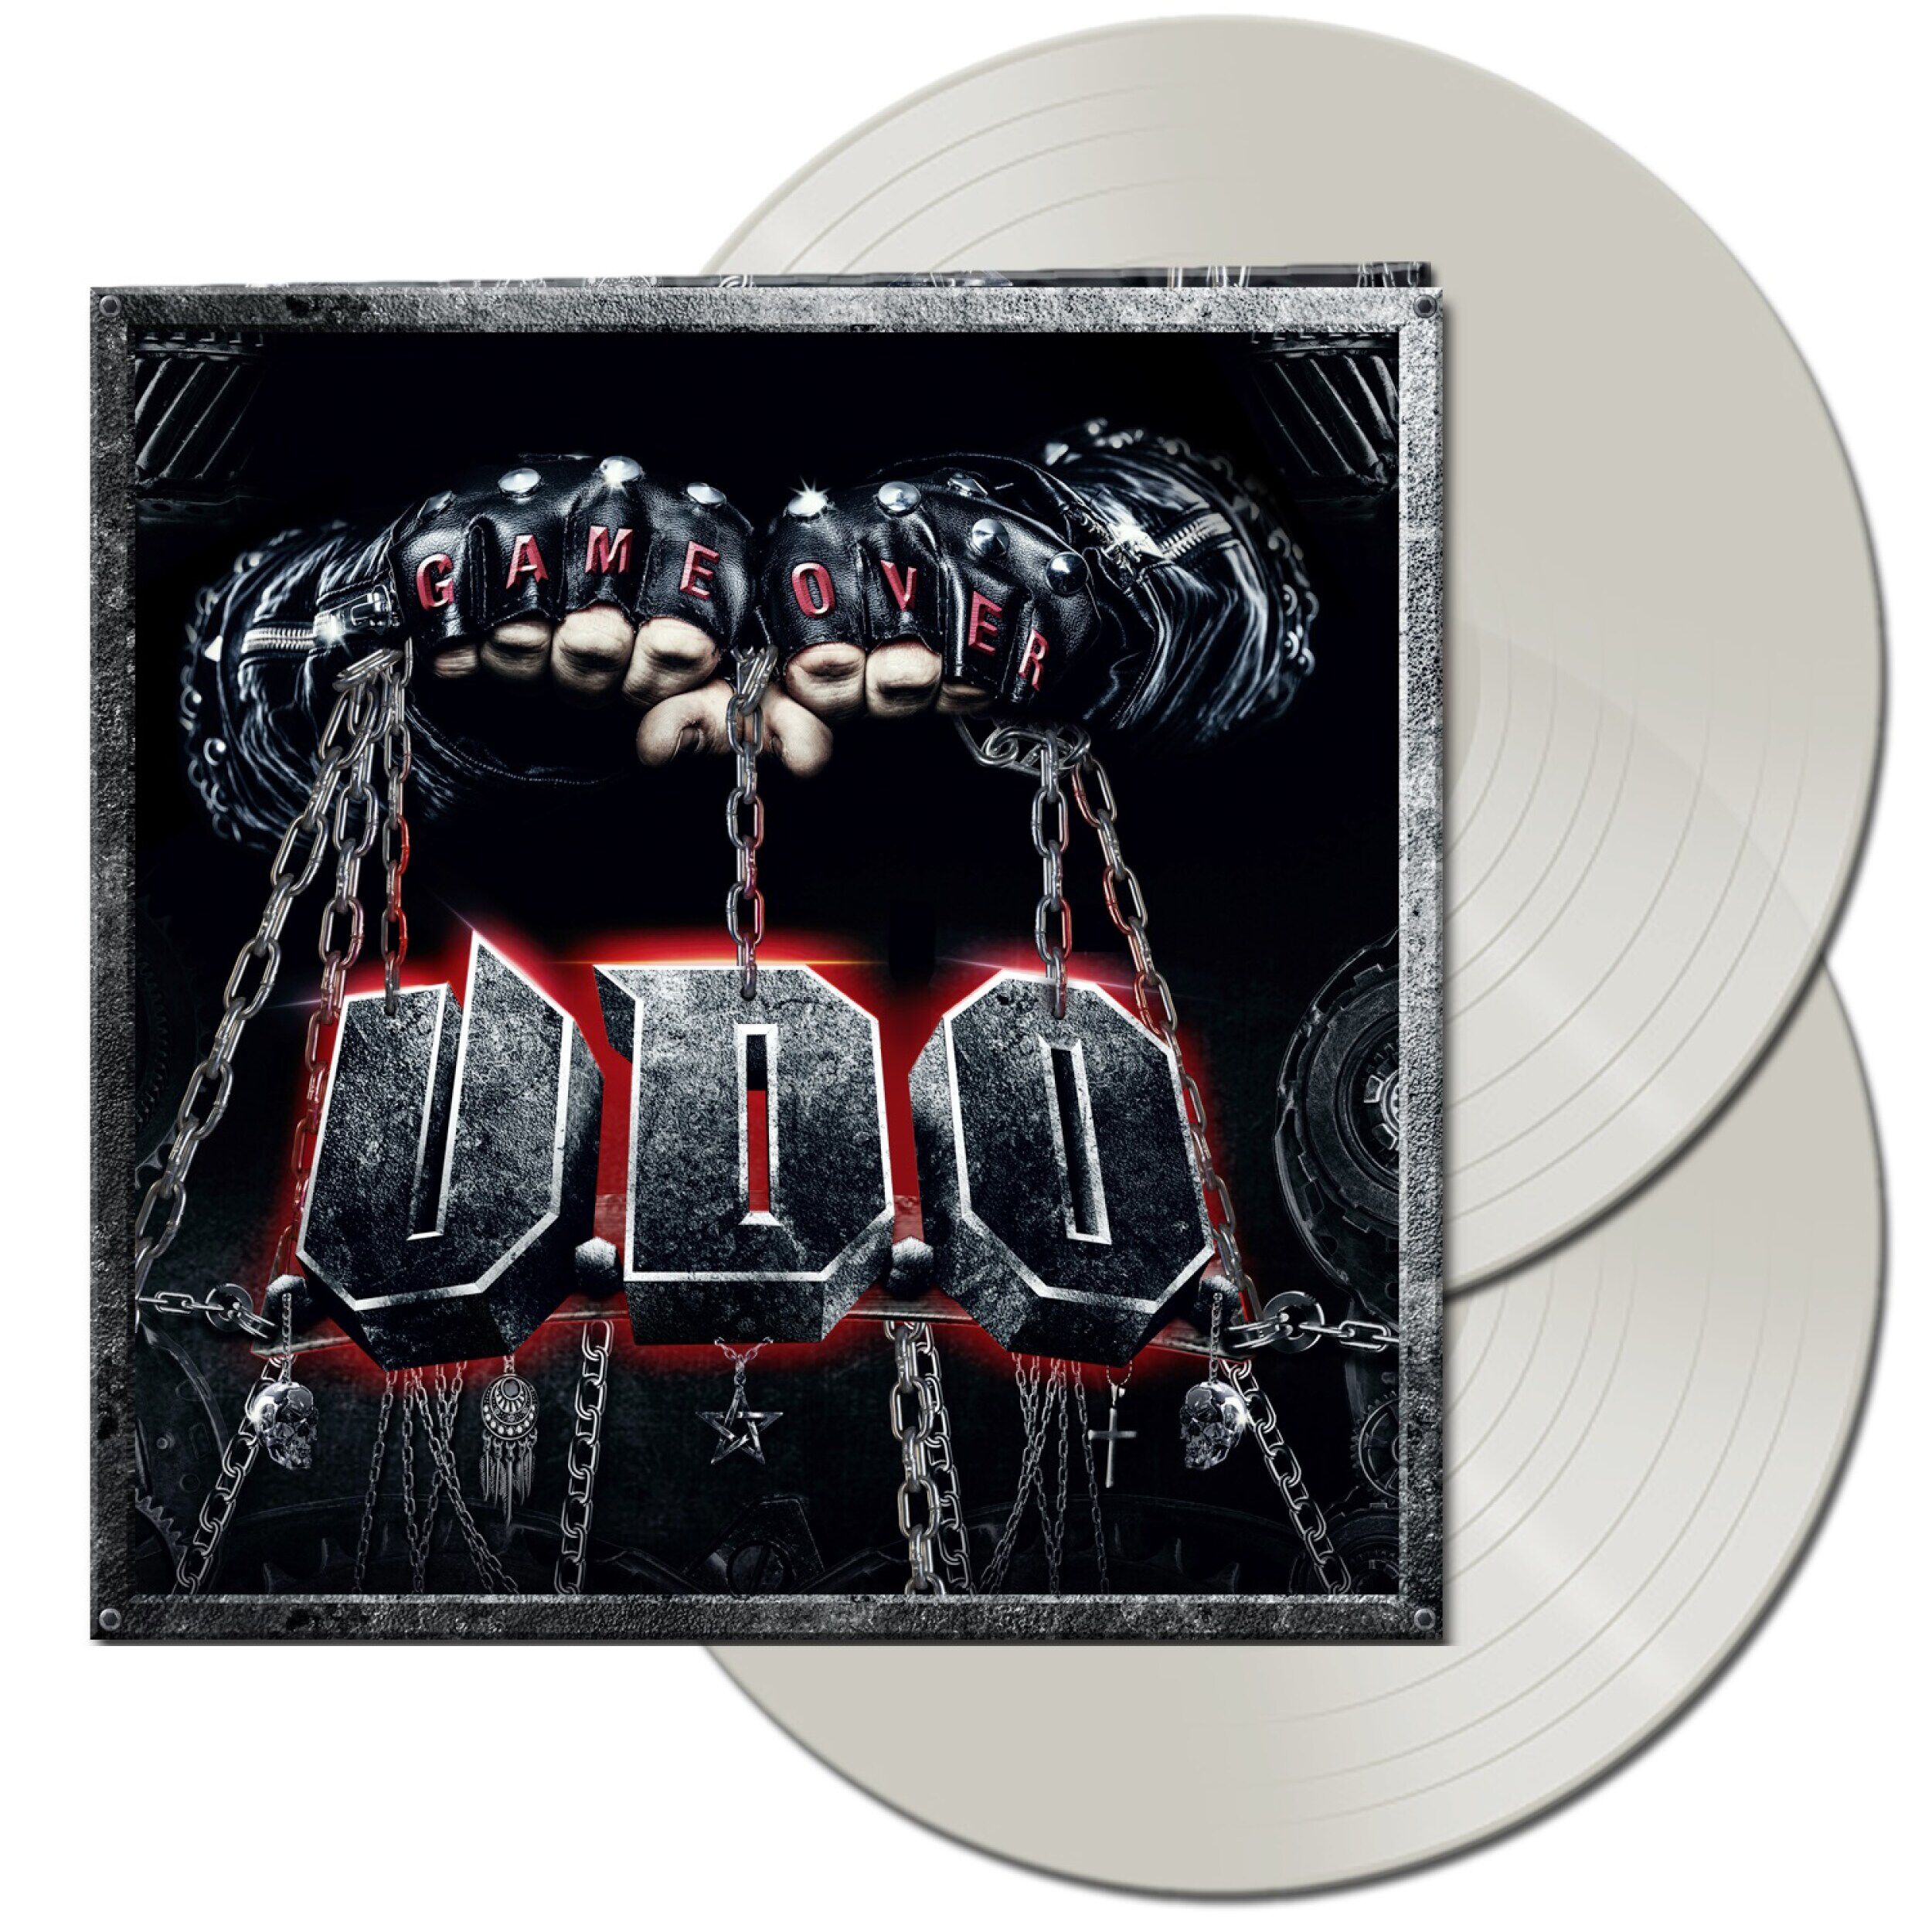 Image of U.D.O. Game over 2-LP farbig